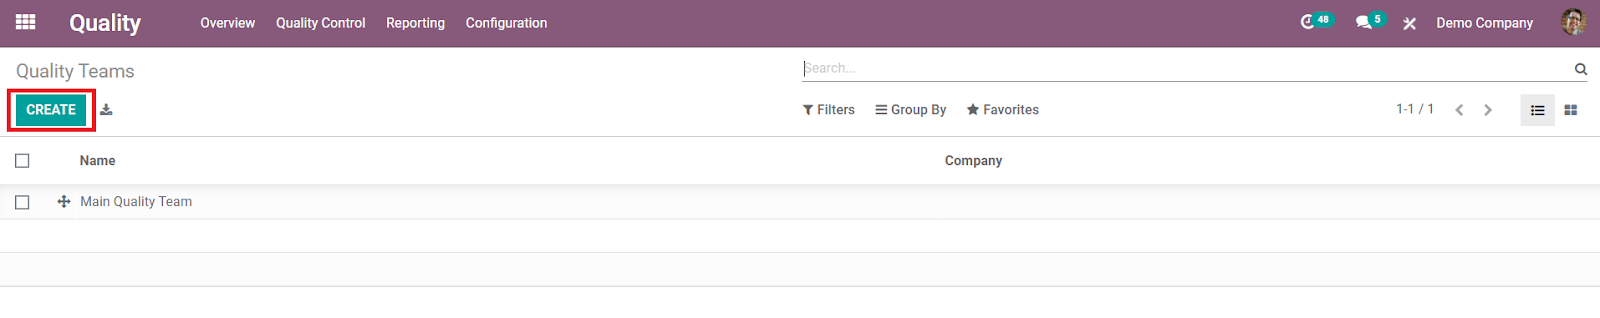 how-to-control-the-quality-of-product-using-odoo